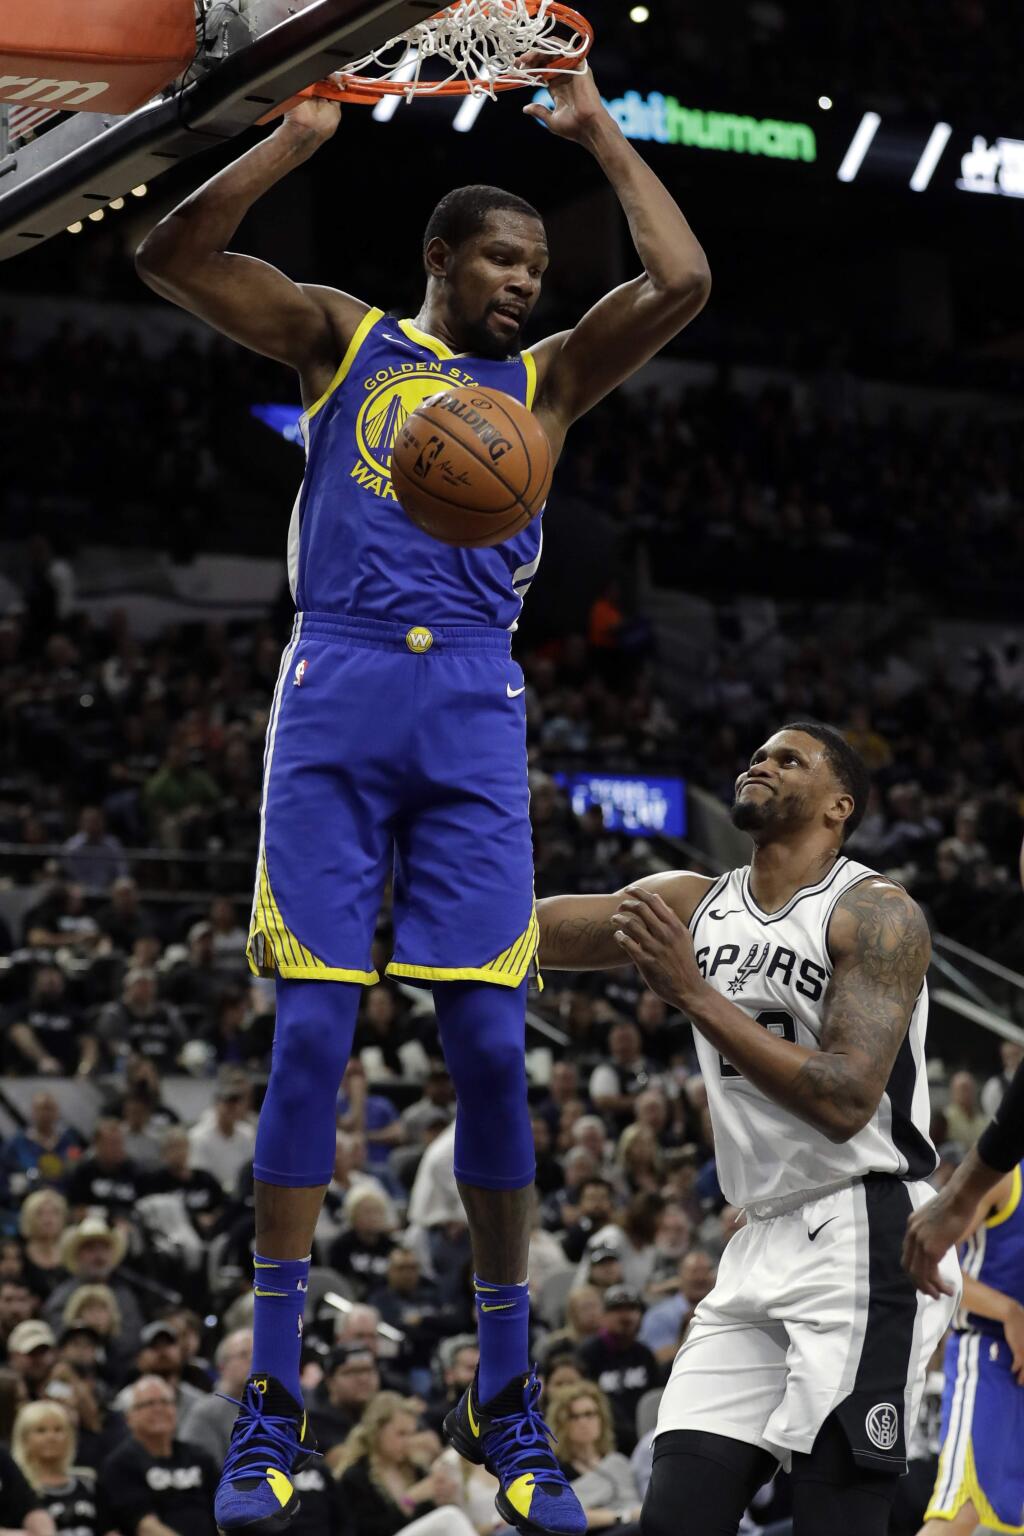 In this April 19, 2018, file photo, Golden State Warriors forward Kevin Durant dunks as the San Antonio Spurs' Rudy Gay watches during the the first half of Game 3 of a first-round playoff series in San Antonio. (AP Photo/Tony Gutierrez, File)